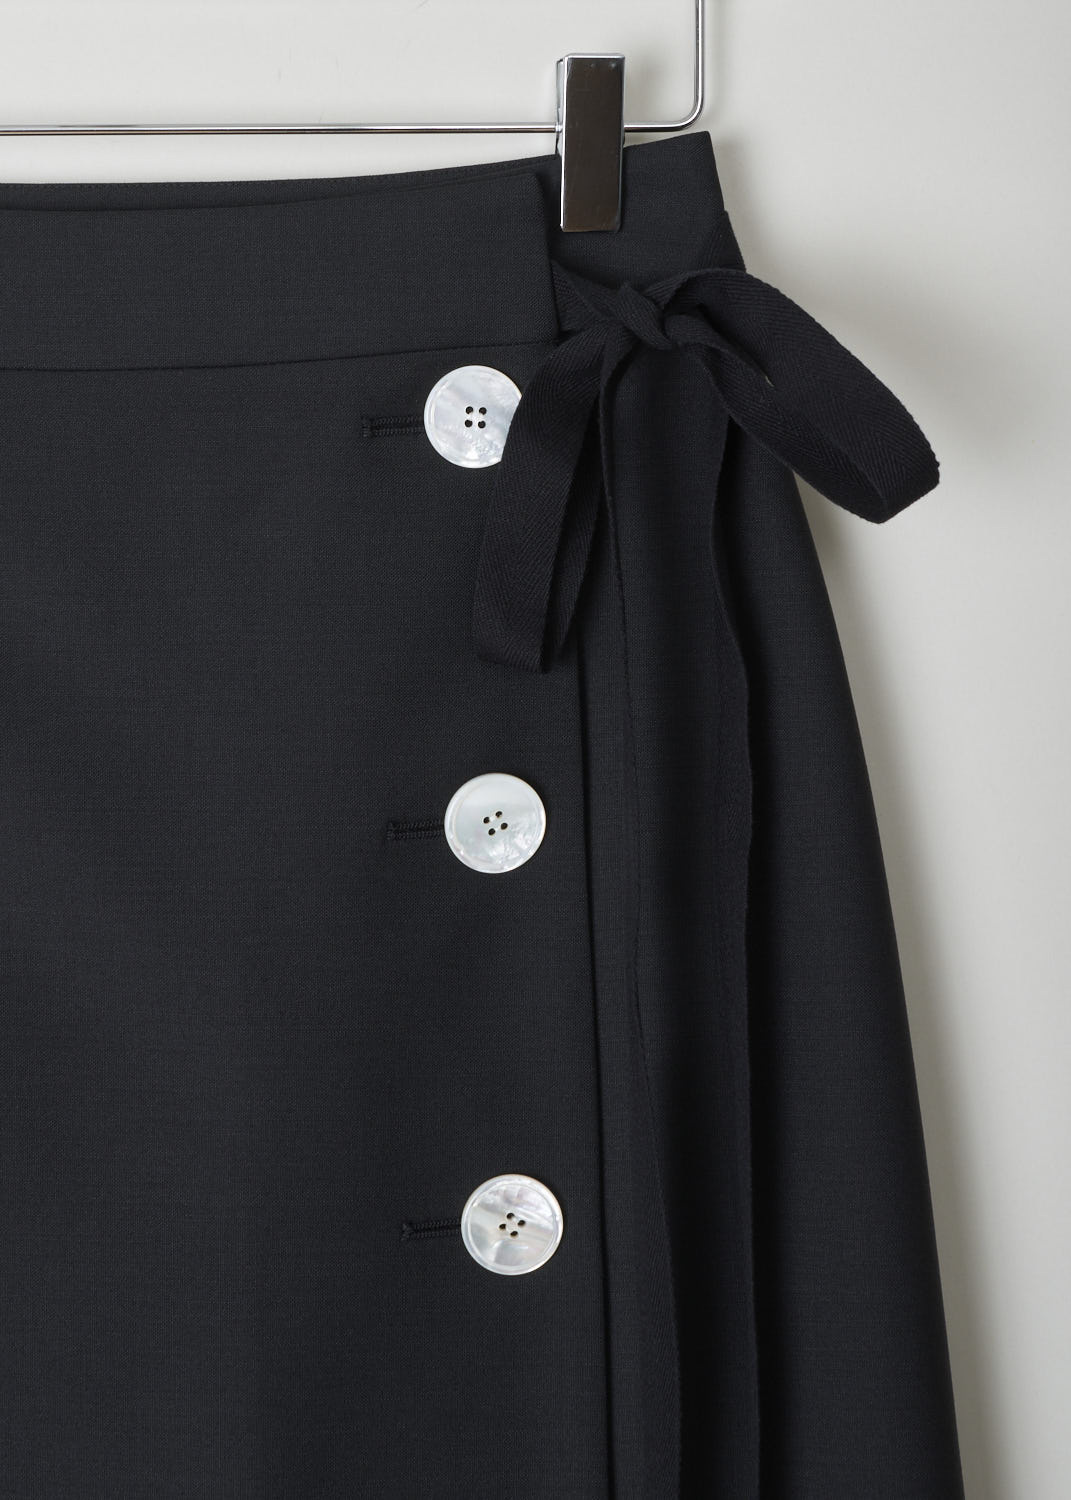 PRADA, BLACK WRAP SKIRT WITH BUTTONS AND TIE DETAIL, 
KID_MOHAIR_P122R_NERO, Black, Detail, Black wrap skirt with three contrasting mother-of-pearl buttons on the side. Above the buttons, a black ribbon tie detail can be found. Both the buttons and the tie function as the closure option, as well as a concealed button and hook on the inside. 